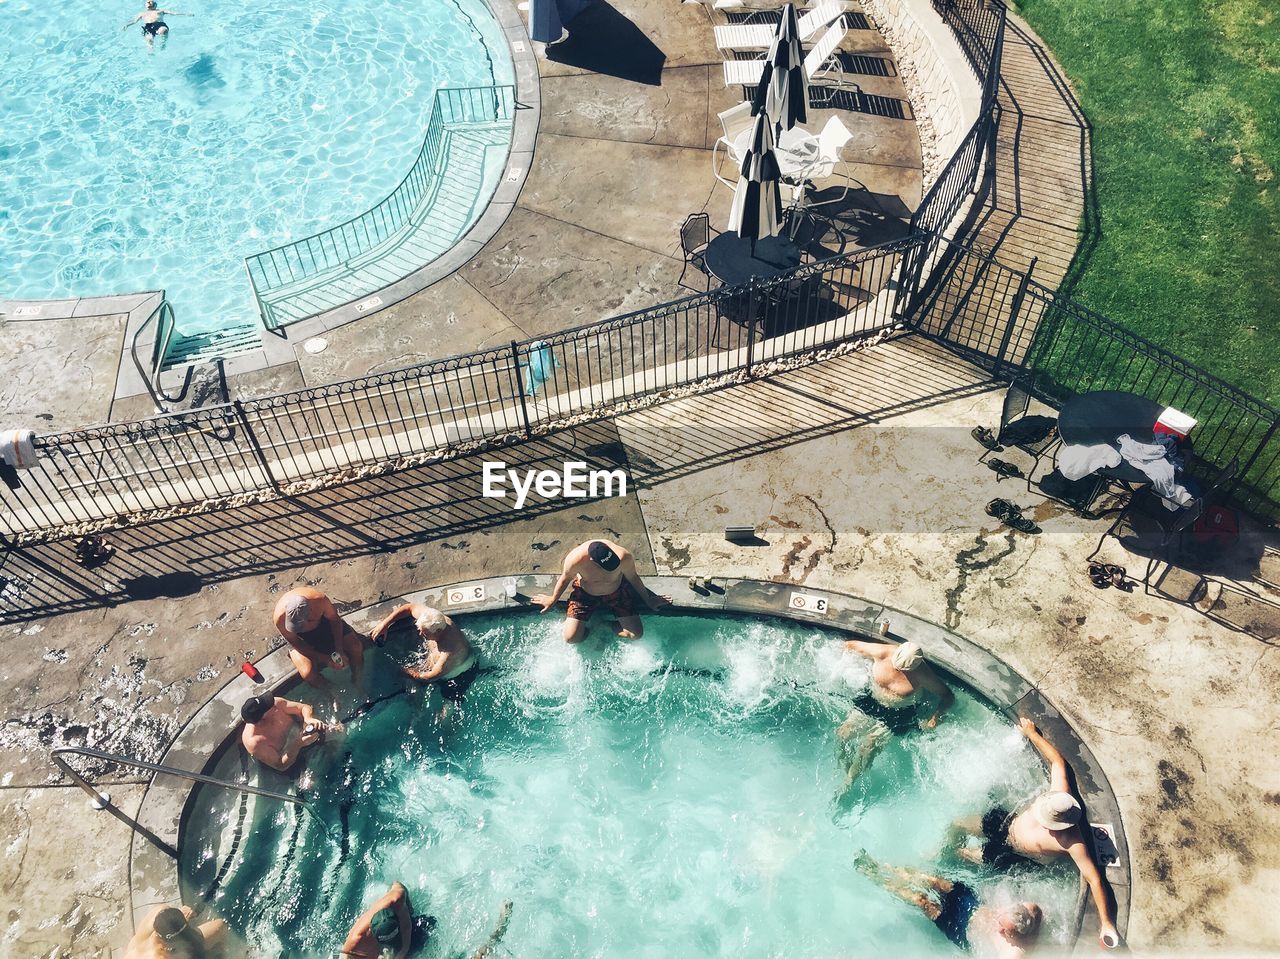 HIGH ANGLE VIEW OF PEOPLE SWIMMING IN POOL AT PARK